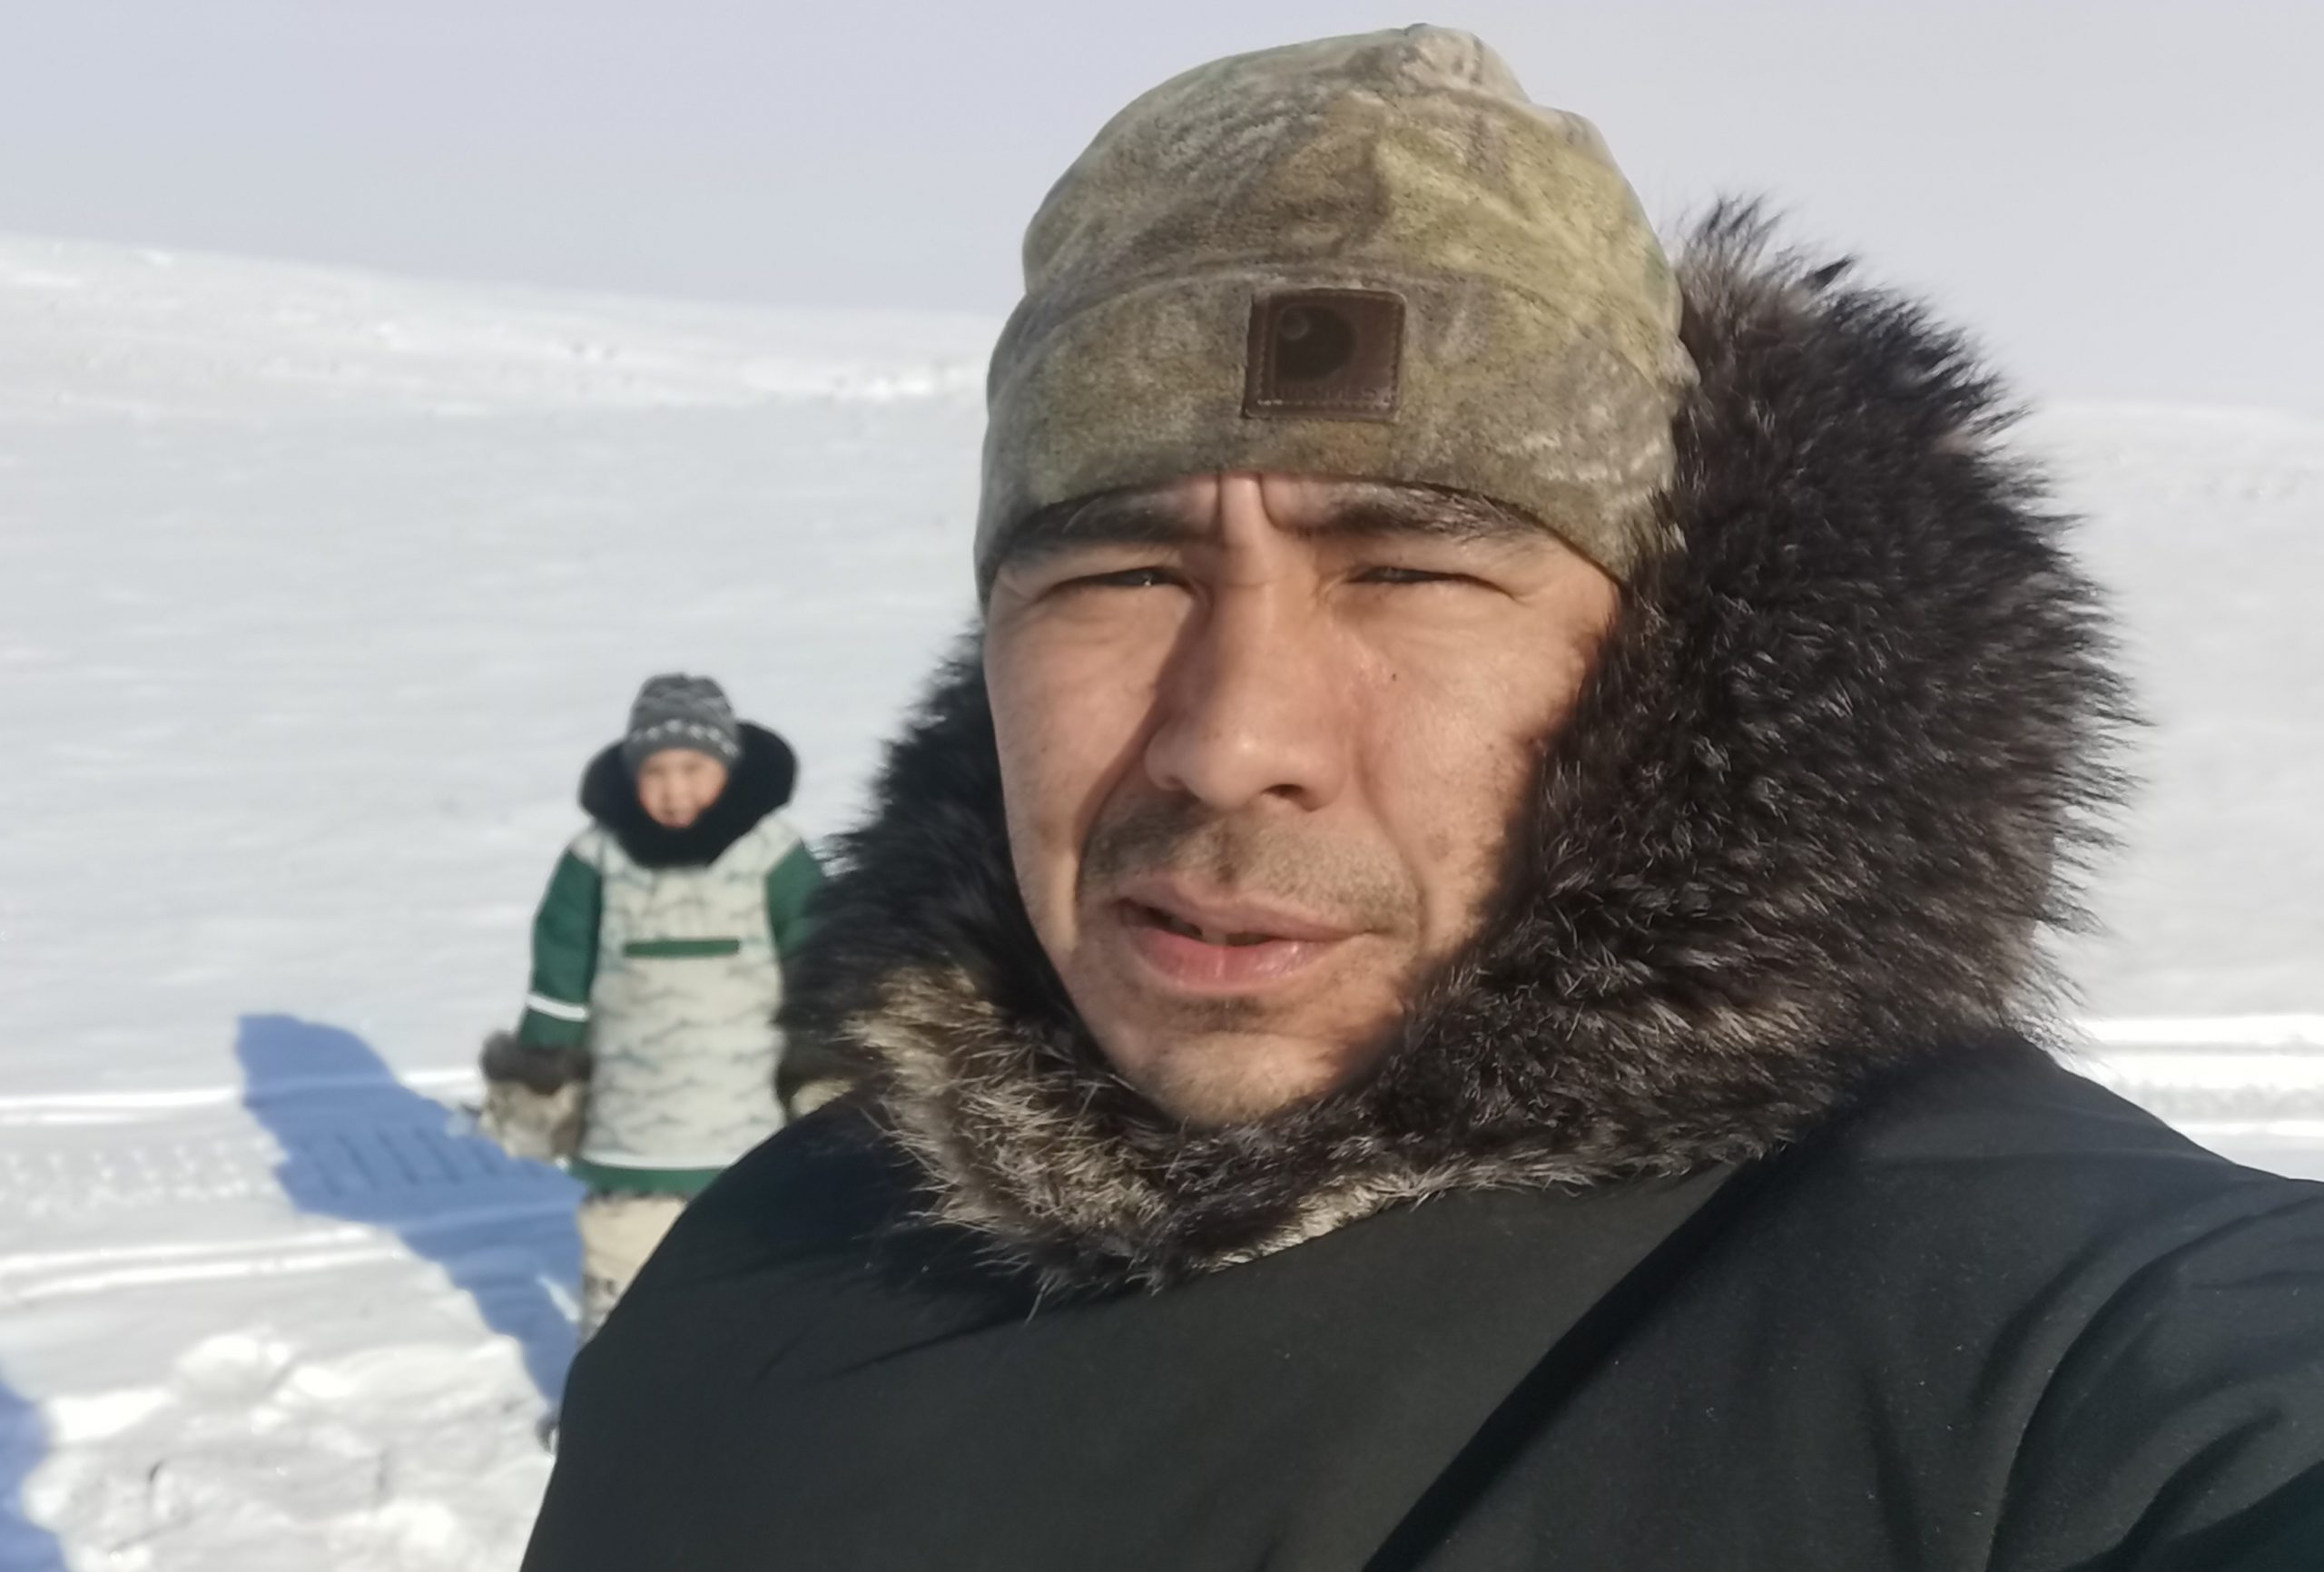 Inuit man and son out on the land in winter